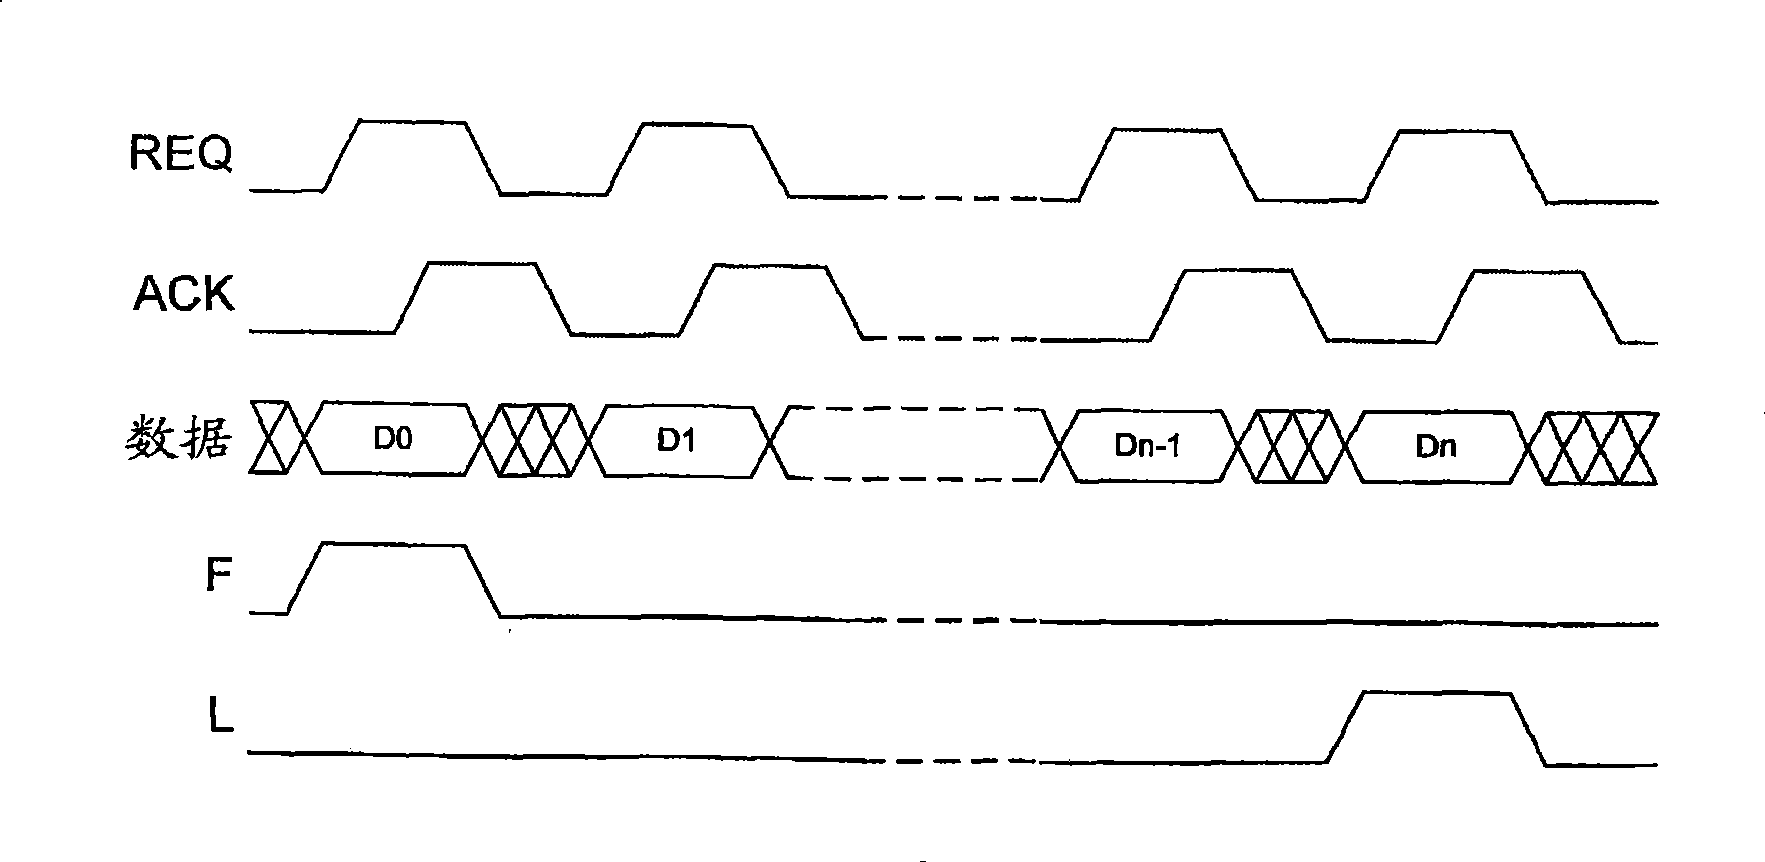 Array of data processing elements with variable precision interconnect